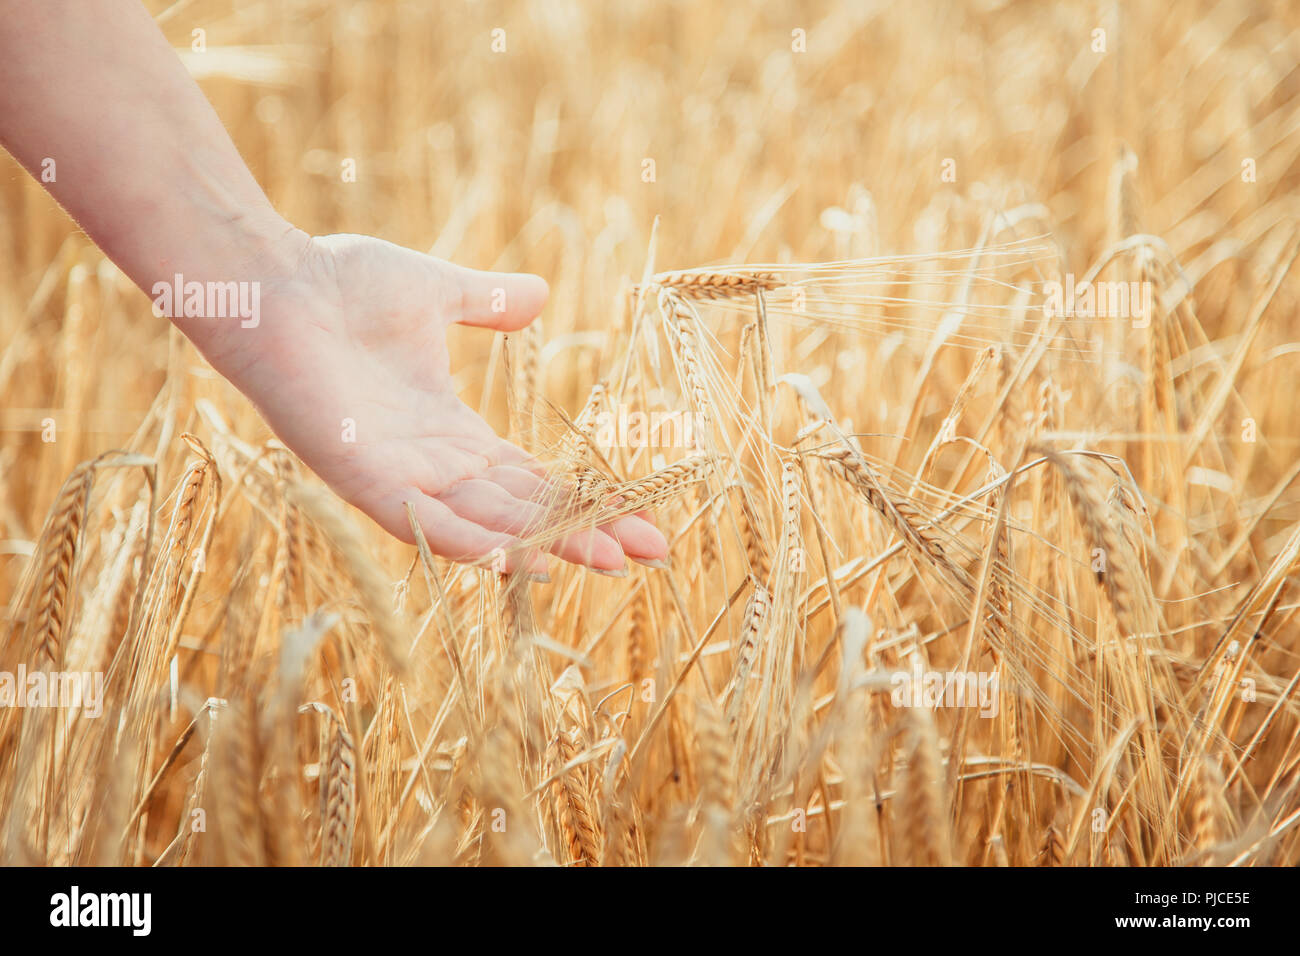 Wheat field. Female hand touching wheat spikelets. Summer harvest. Stock Photo